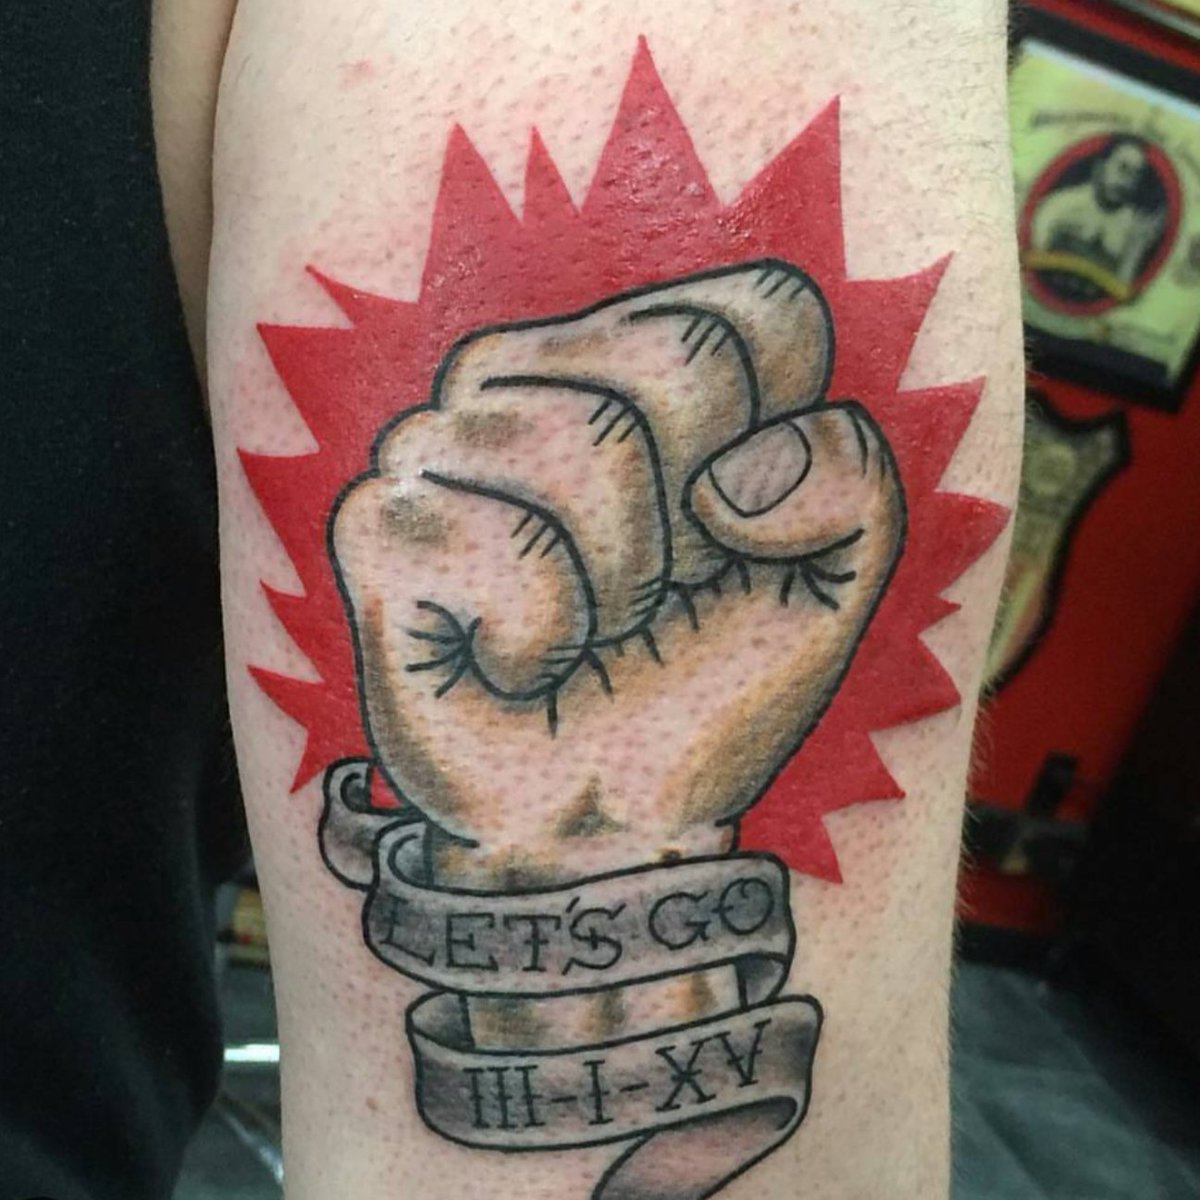 Post a tattoo that’s on your body I'm not one for 'meaningful' tattoos, but this one combines my love for @Rancid with the date I began wrestling training at @NYWCWRESTLING